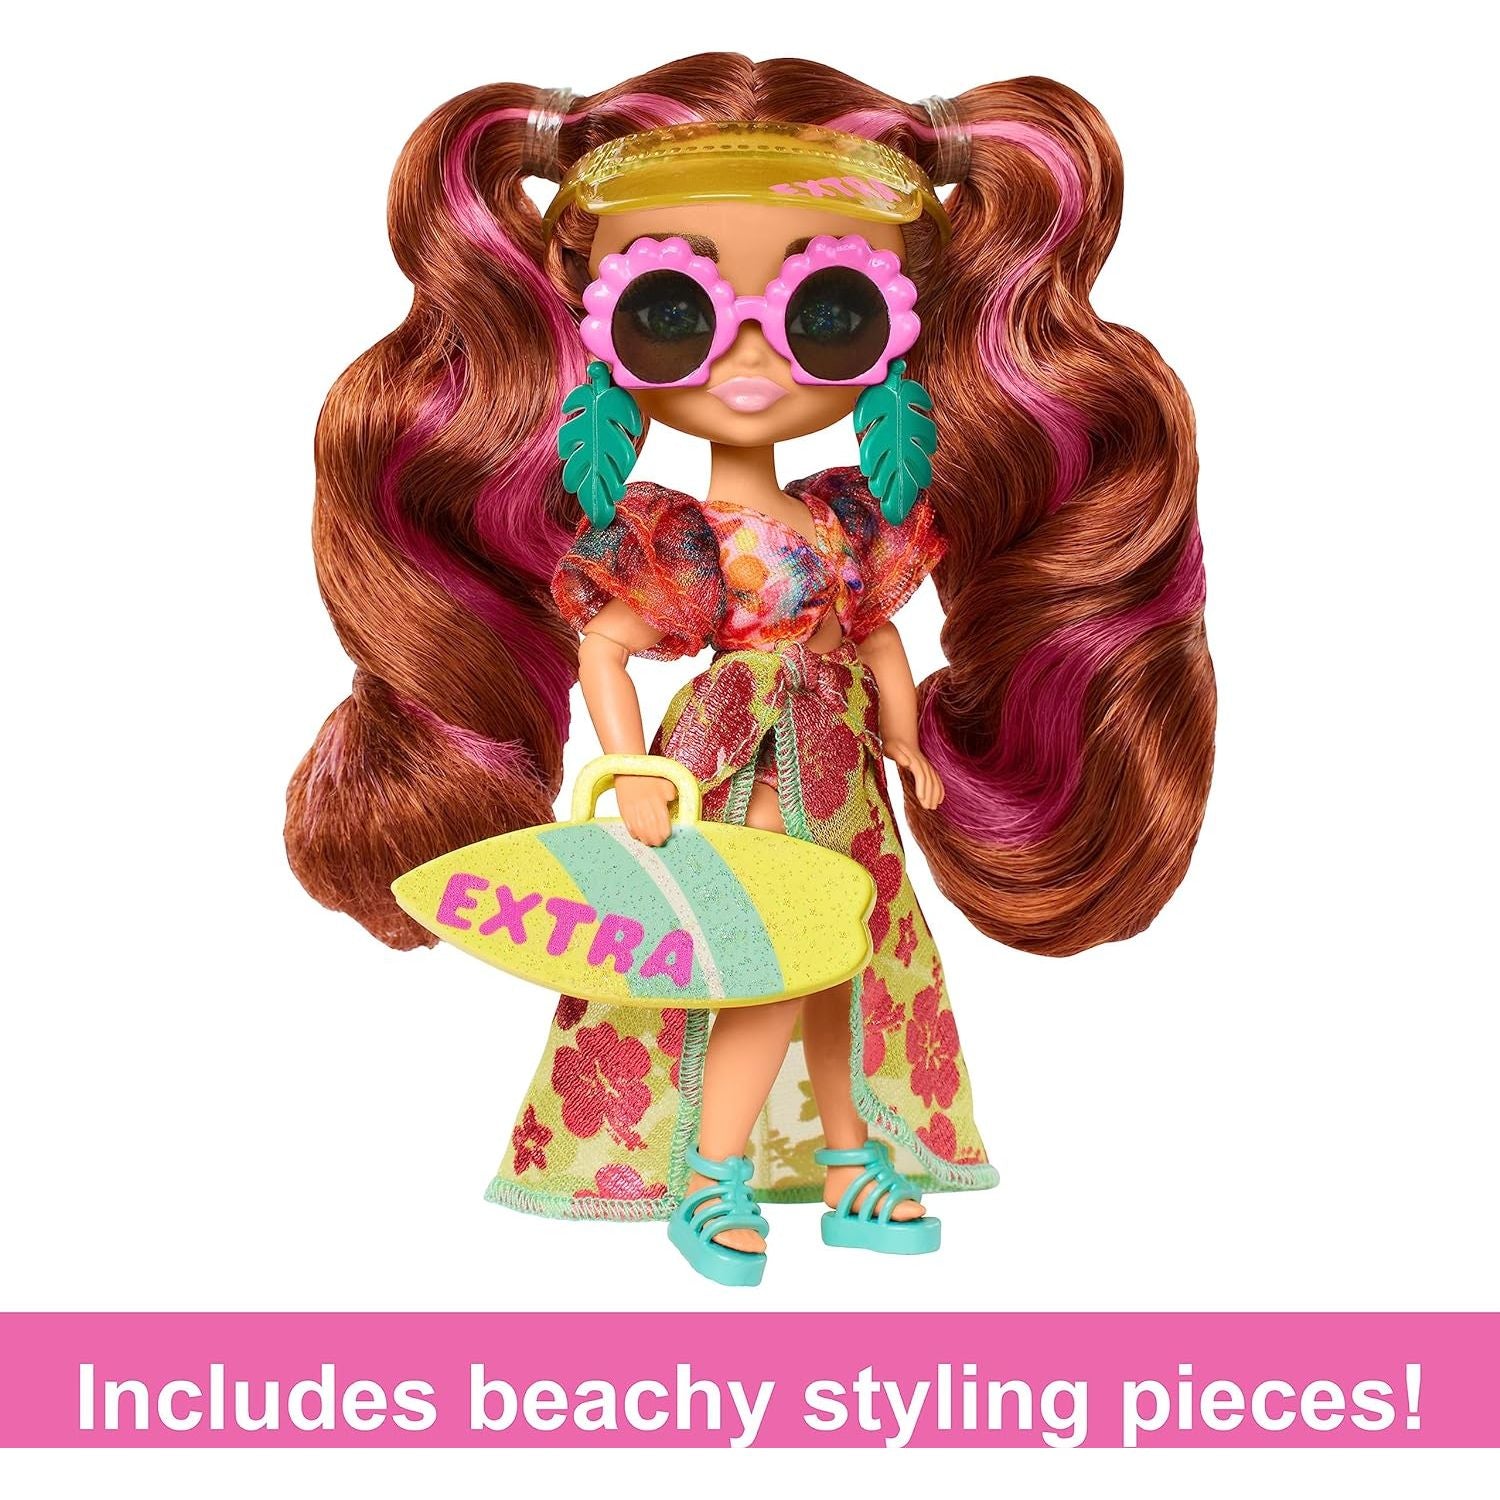 Barbie Extra Minis Travel Doll with Beach Fashion, Barbie Extra Fly Small Doll, Tropical Outfit with Accessories